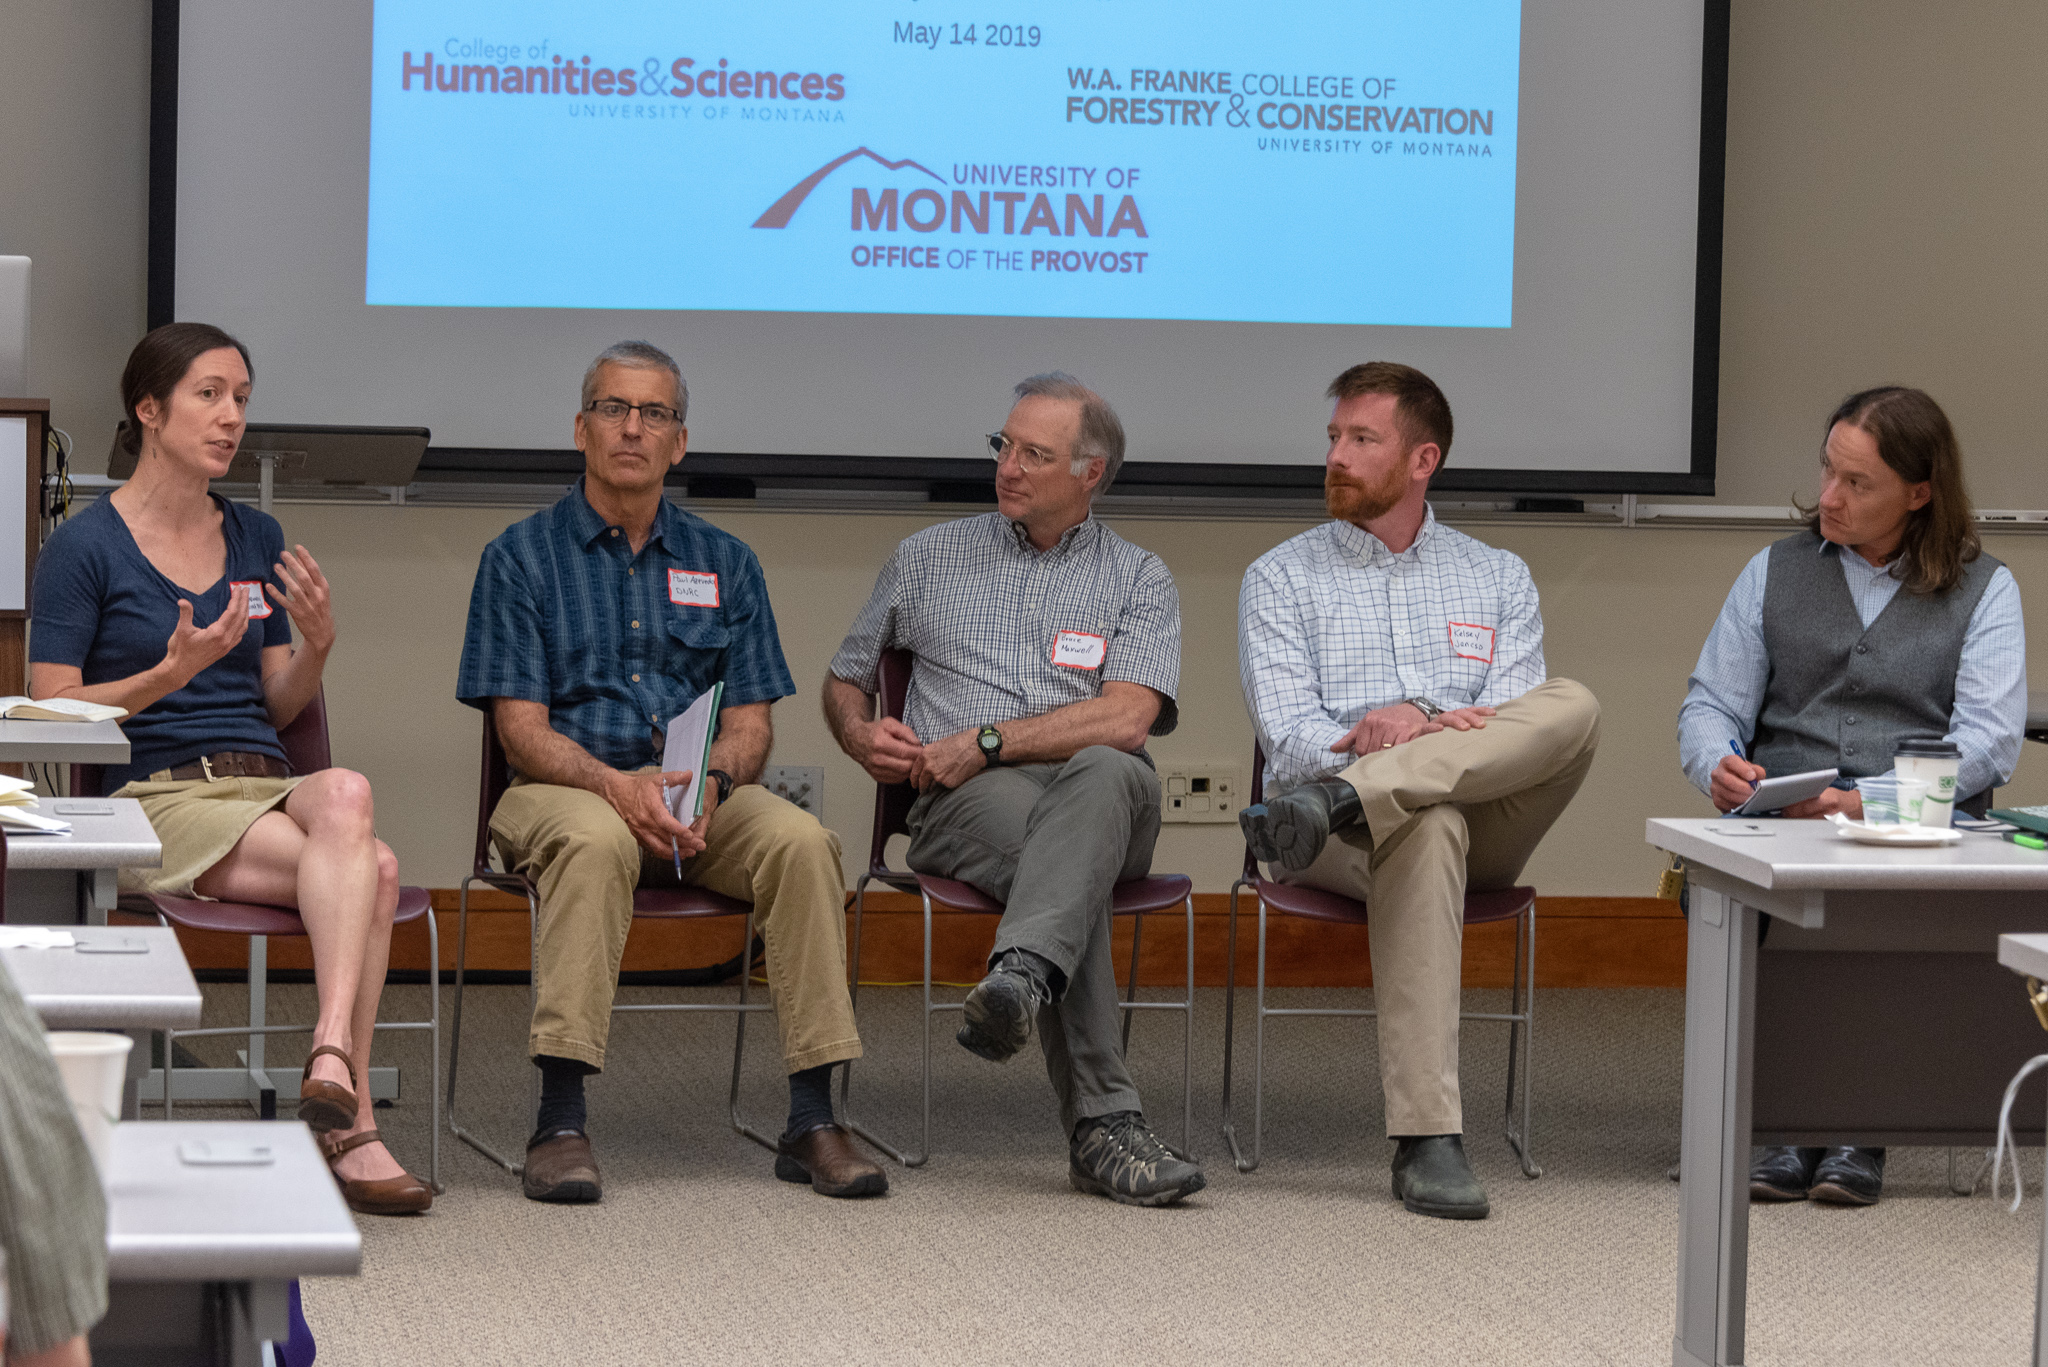 Panel addresses some of the challenges facing agriculture and water use. (Panel from left to right: Kelly Cobourn; Paul Azevedo; Bruce Maxwell, Kelsey Jesco, Brian Chaffin)